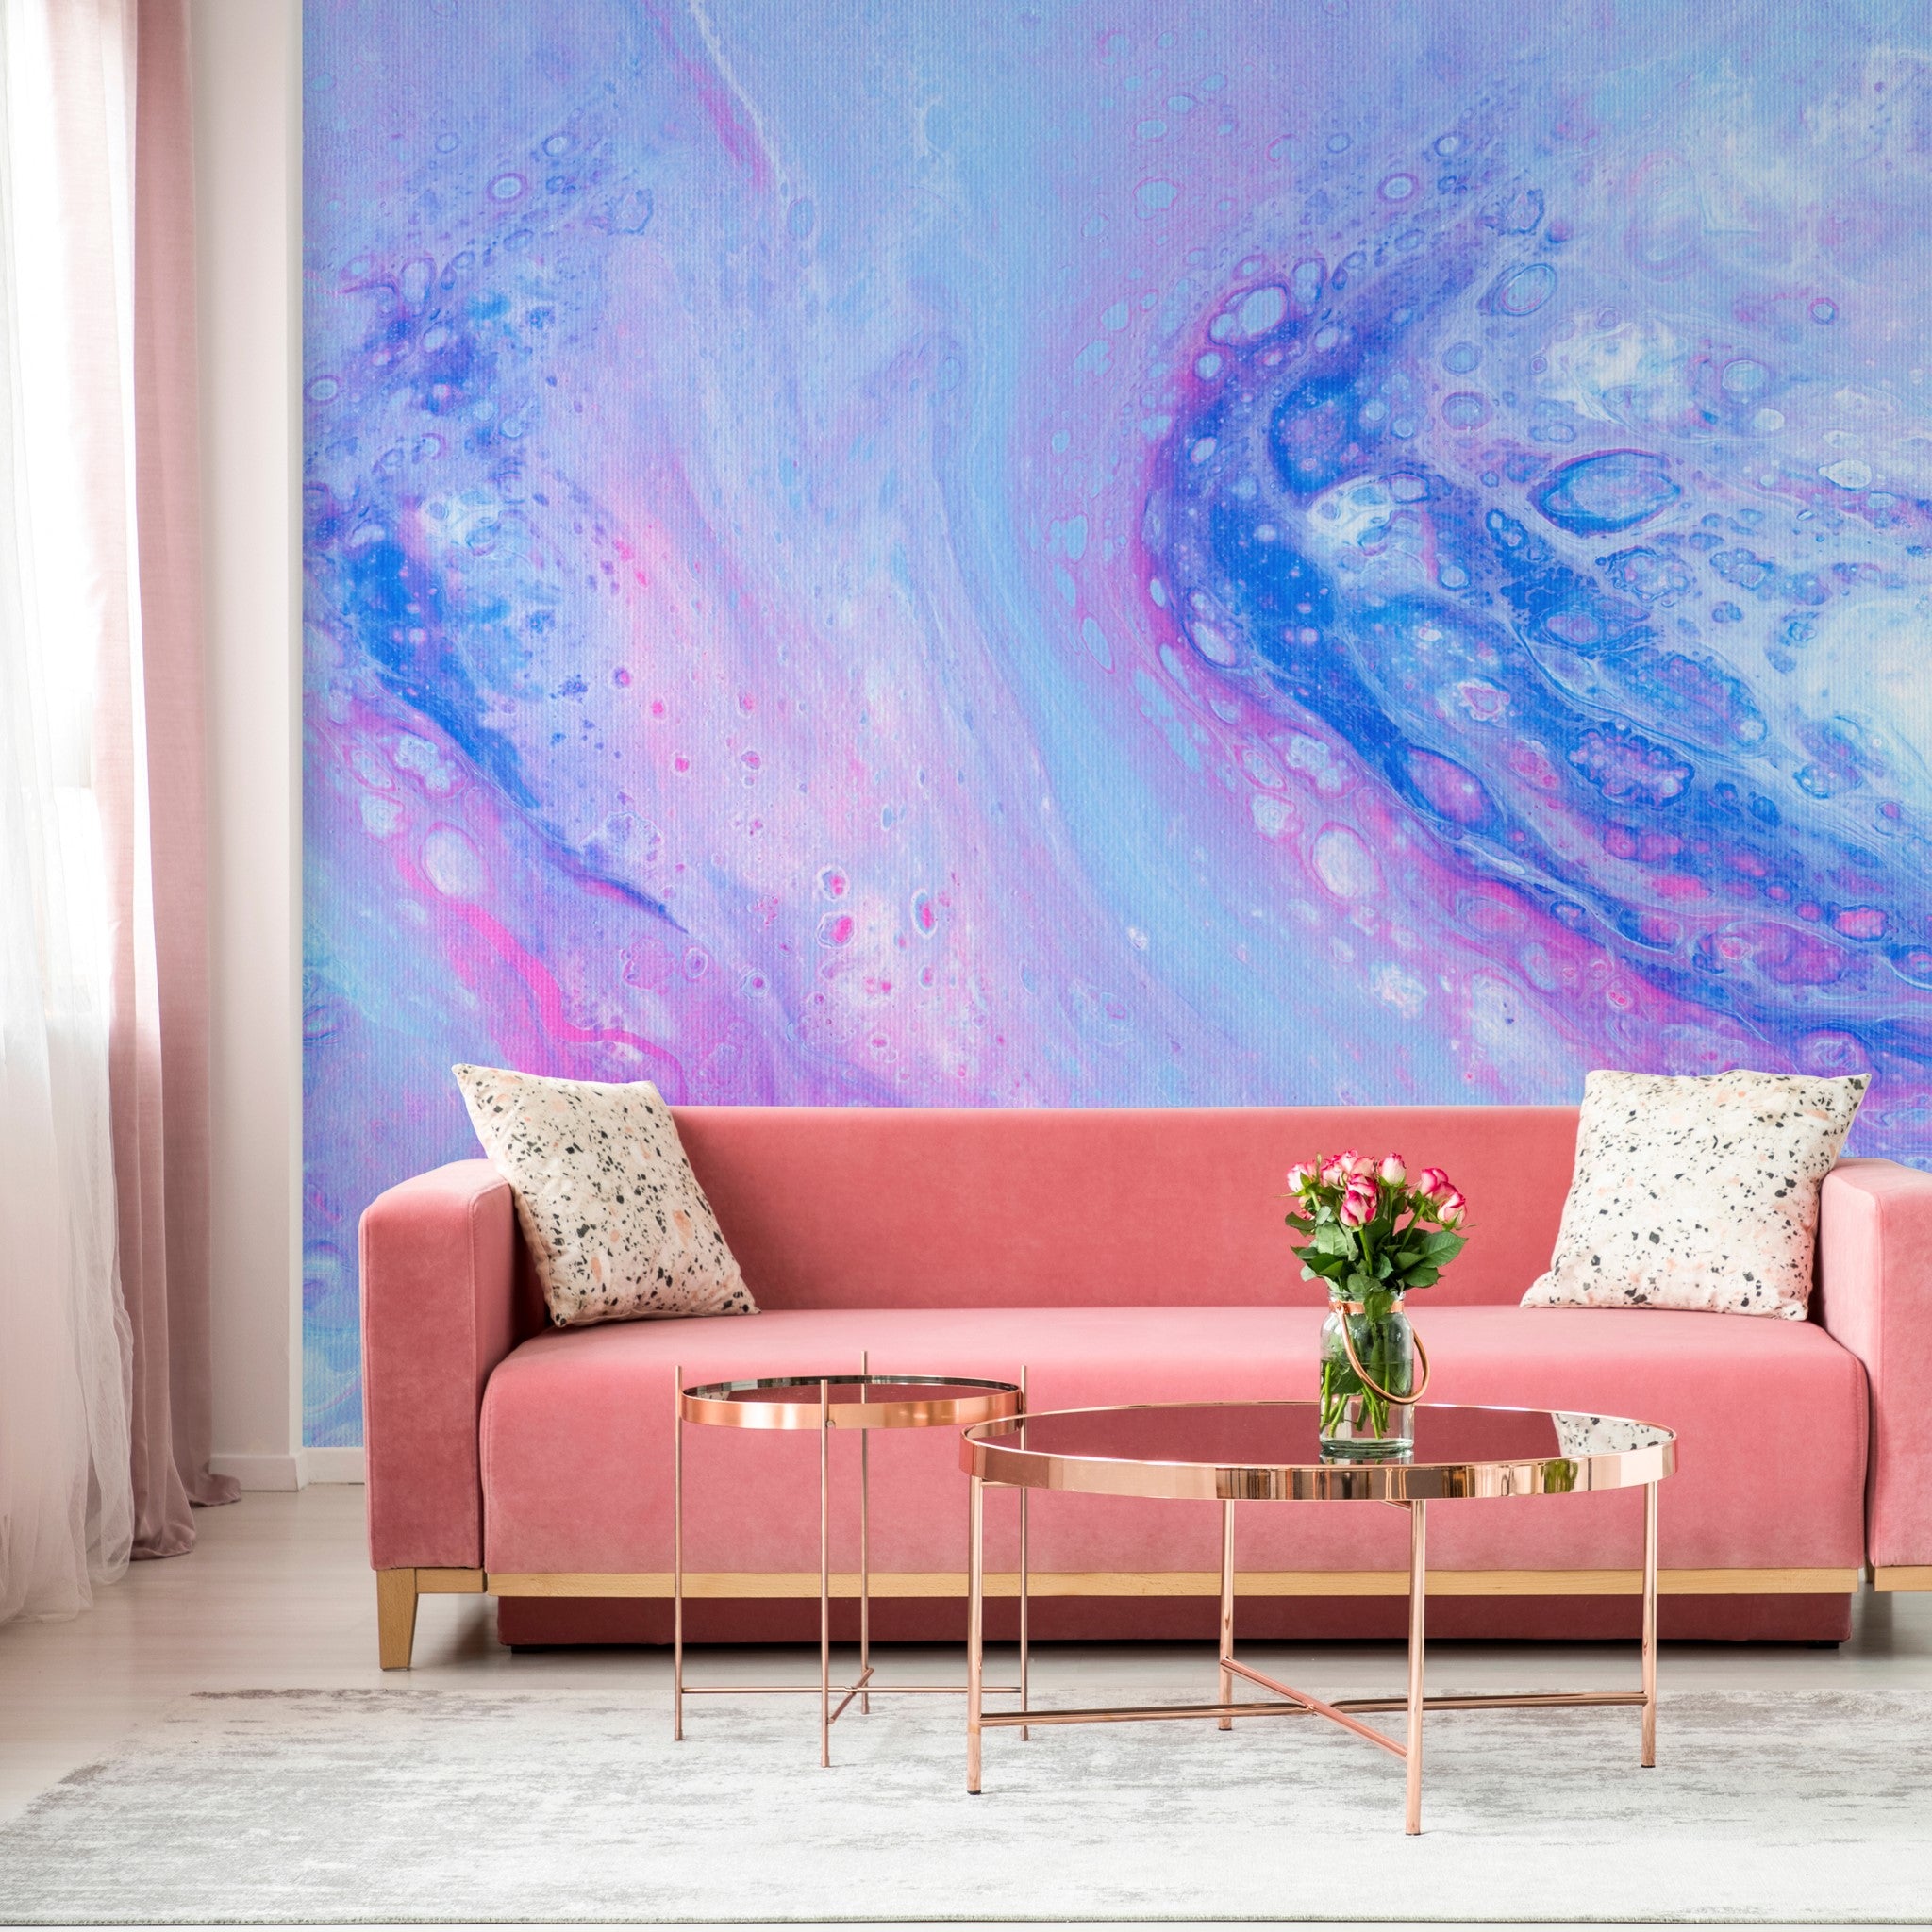 "Vibrant Malibu Wallpaper by Wall Blush enhancing the living room's modern decor with pink accents."